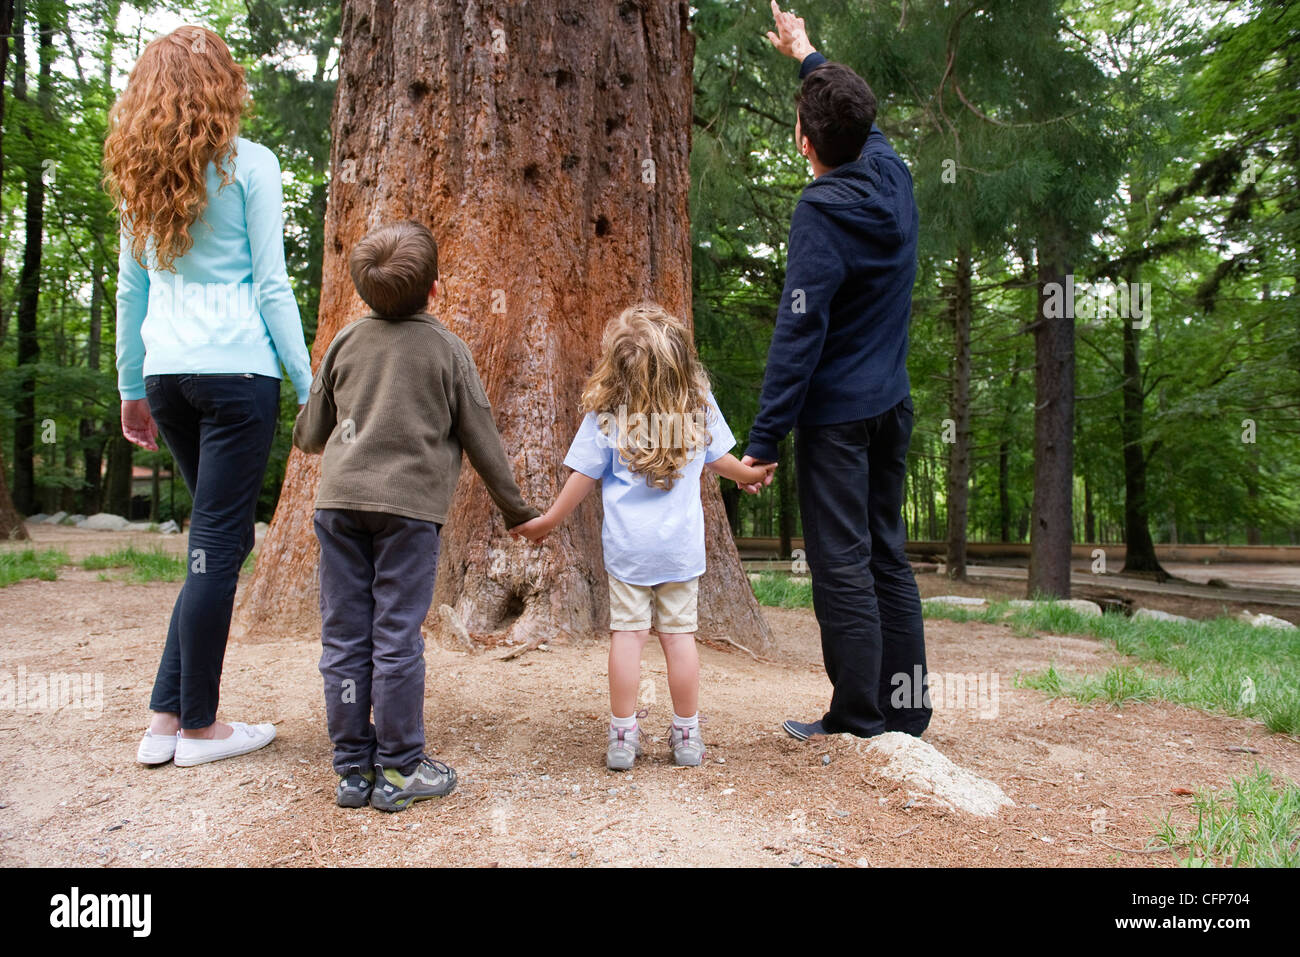 Family standing together at base of tree, rear view Stock Photo